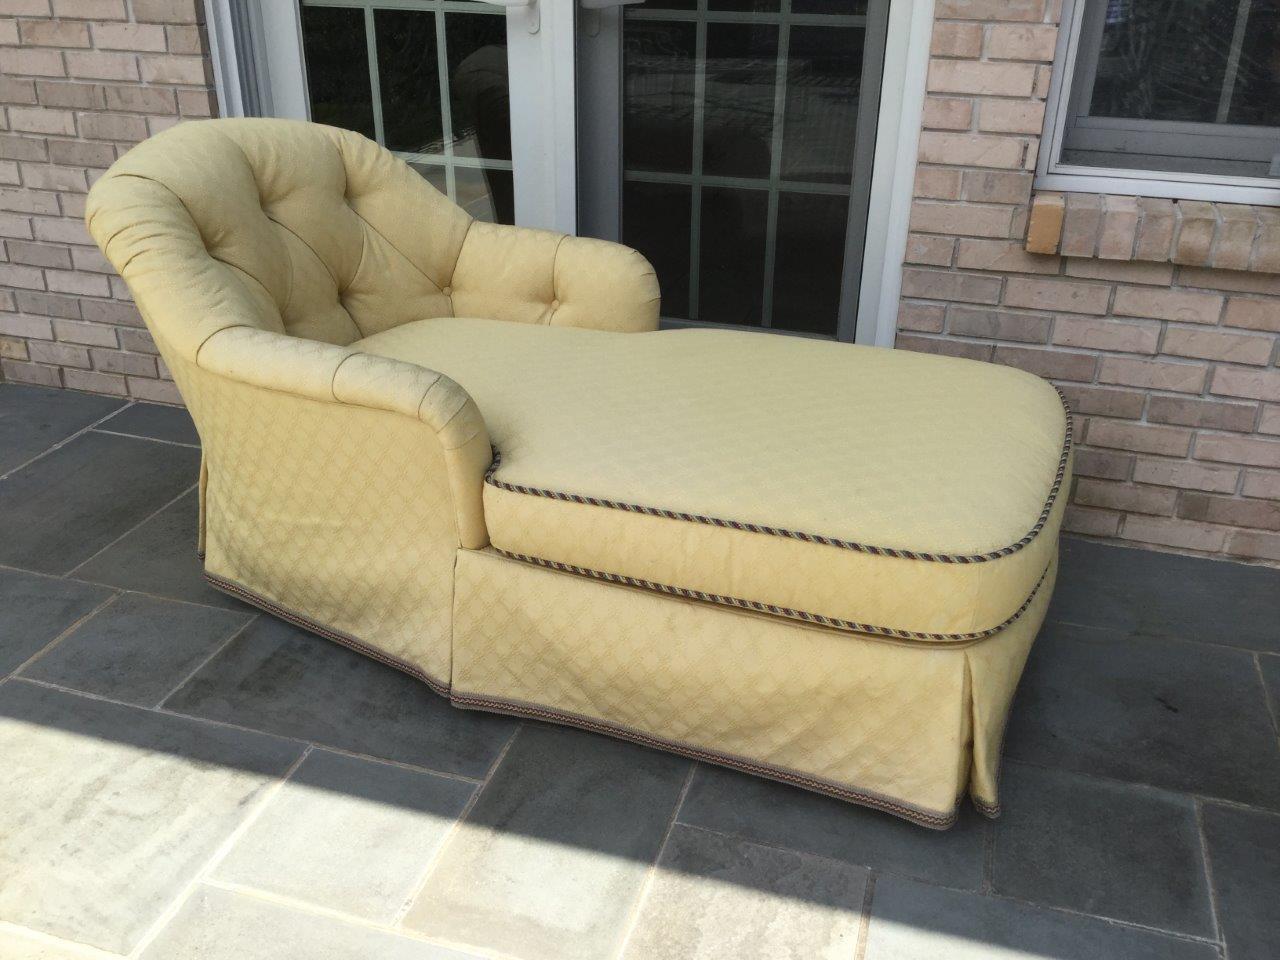 Romantic soft yellow upholstered chaise beautifully tufted with a flat skirt and an accent gimp. Upholstery is heavy weight cotton with a subtle diamond pattern in the fabric. The entire piece is custom-made of quality materials. The cushion is firm